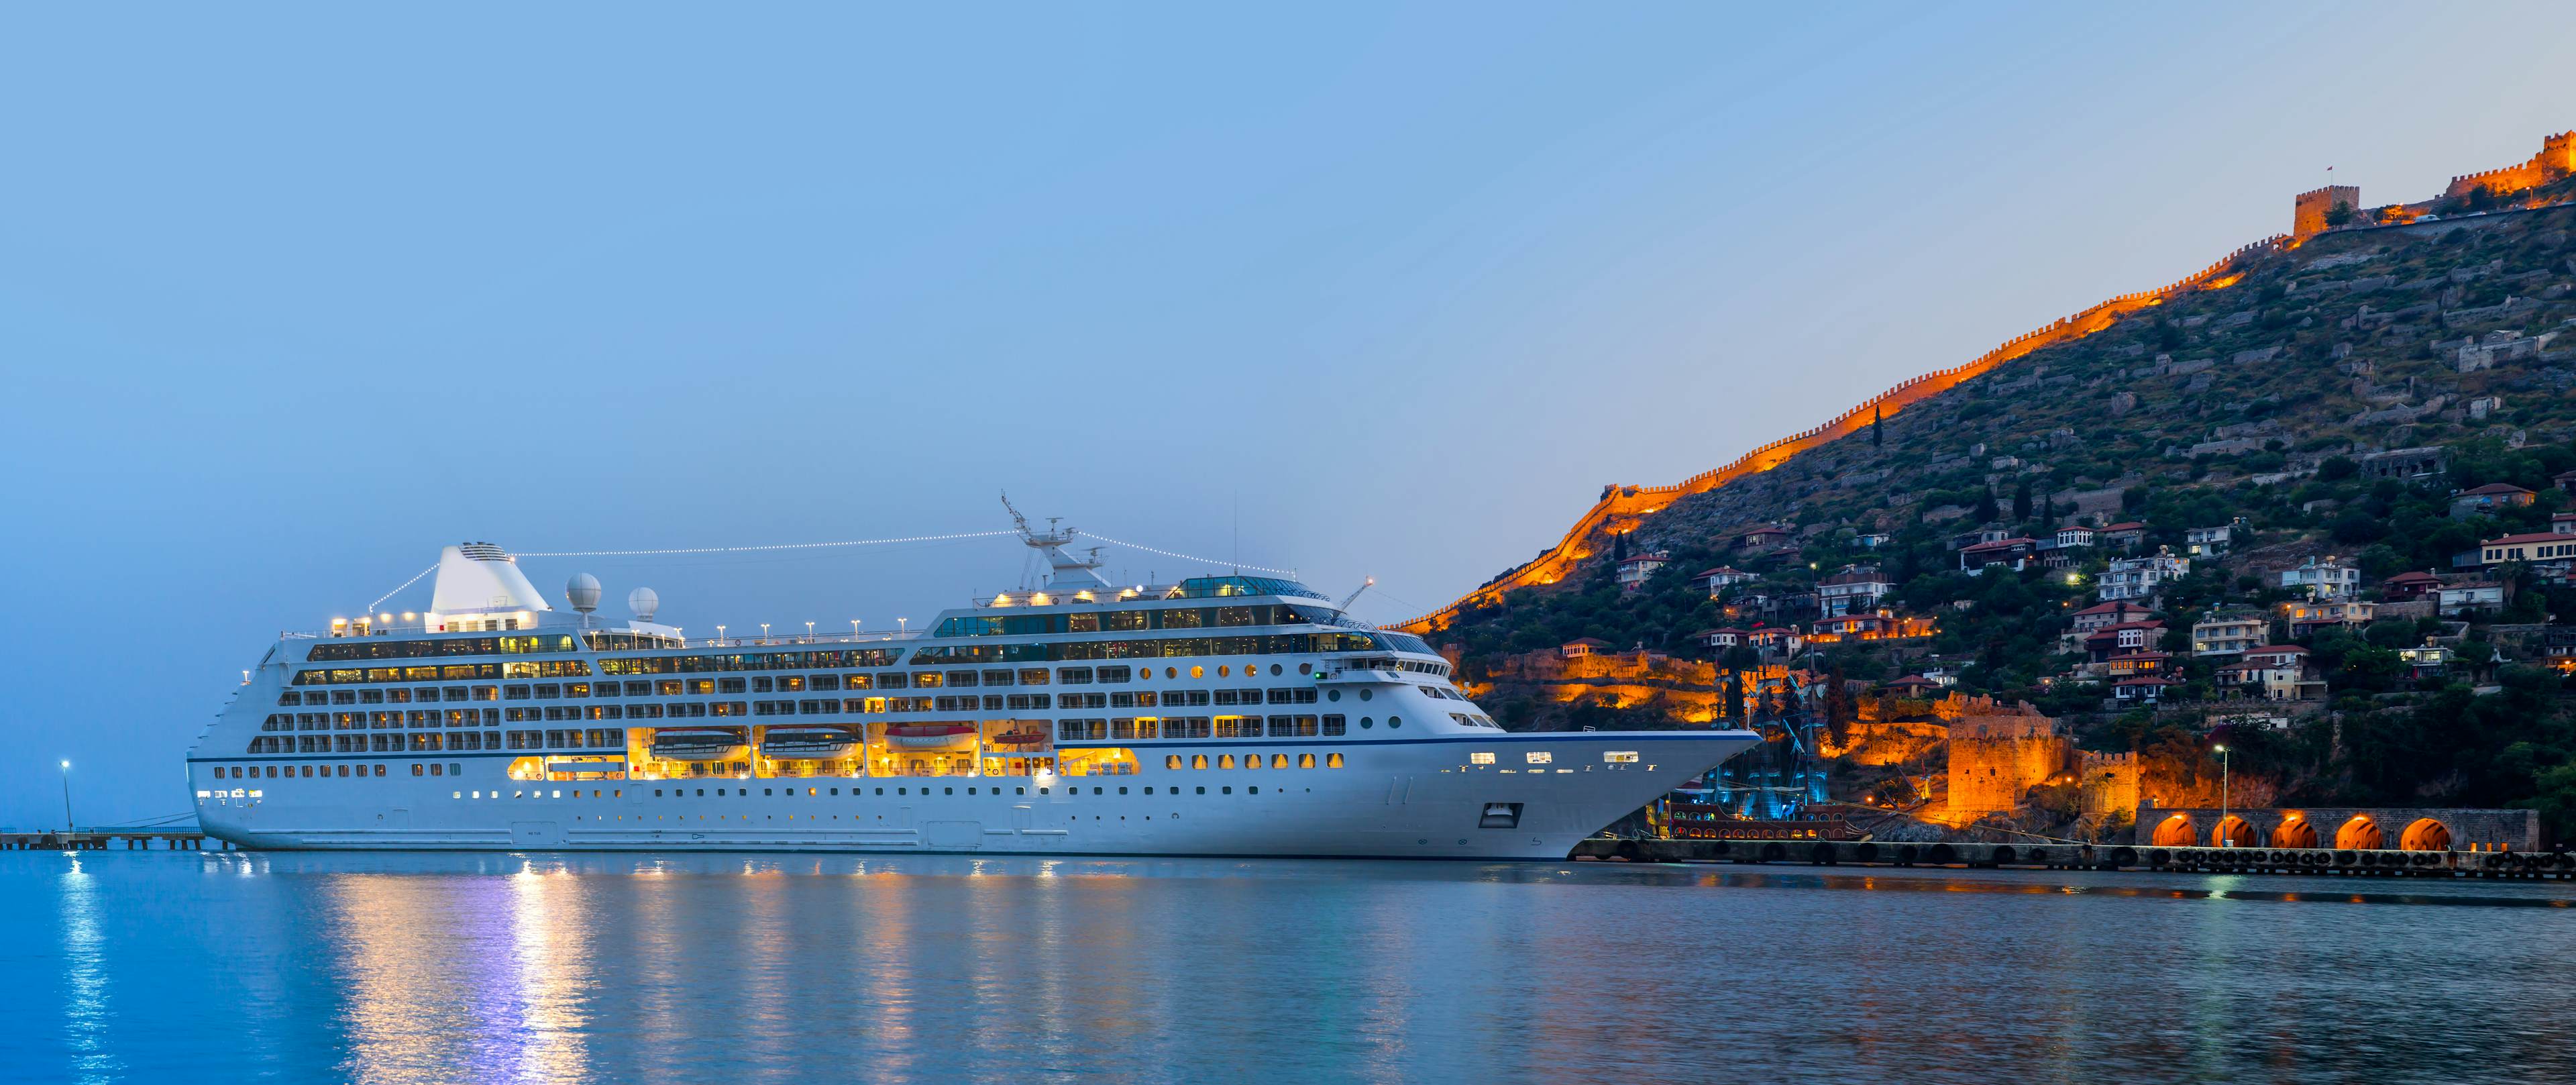 Cruisebound help cruisers book their dream vacation by creating the best online booking experience for cruises